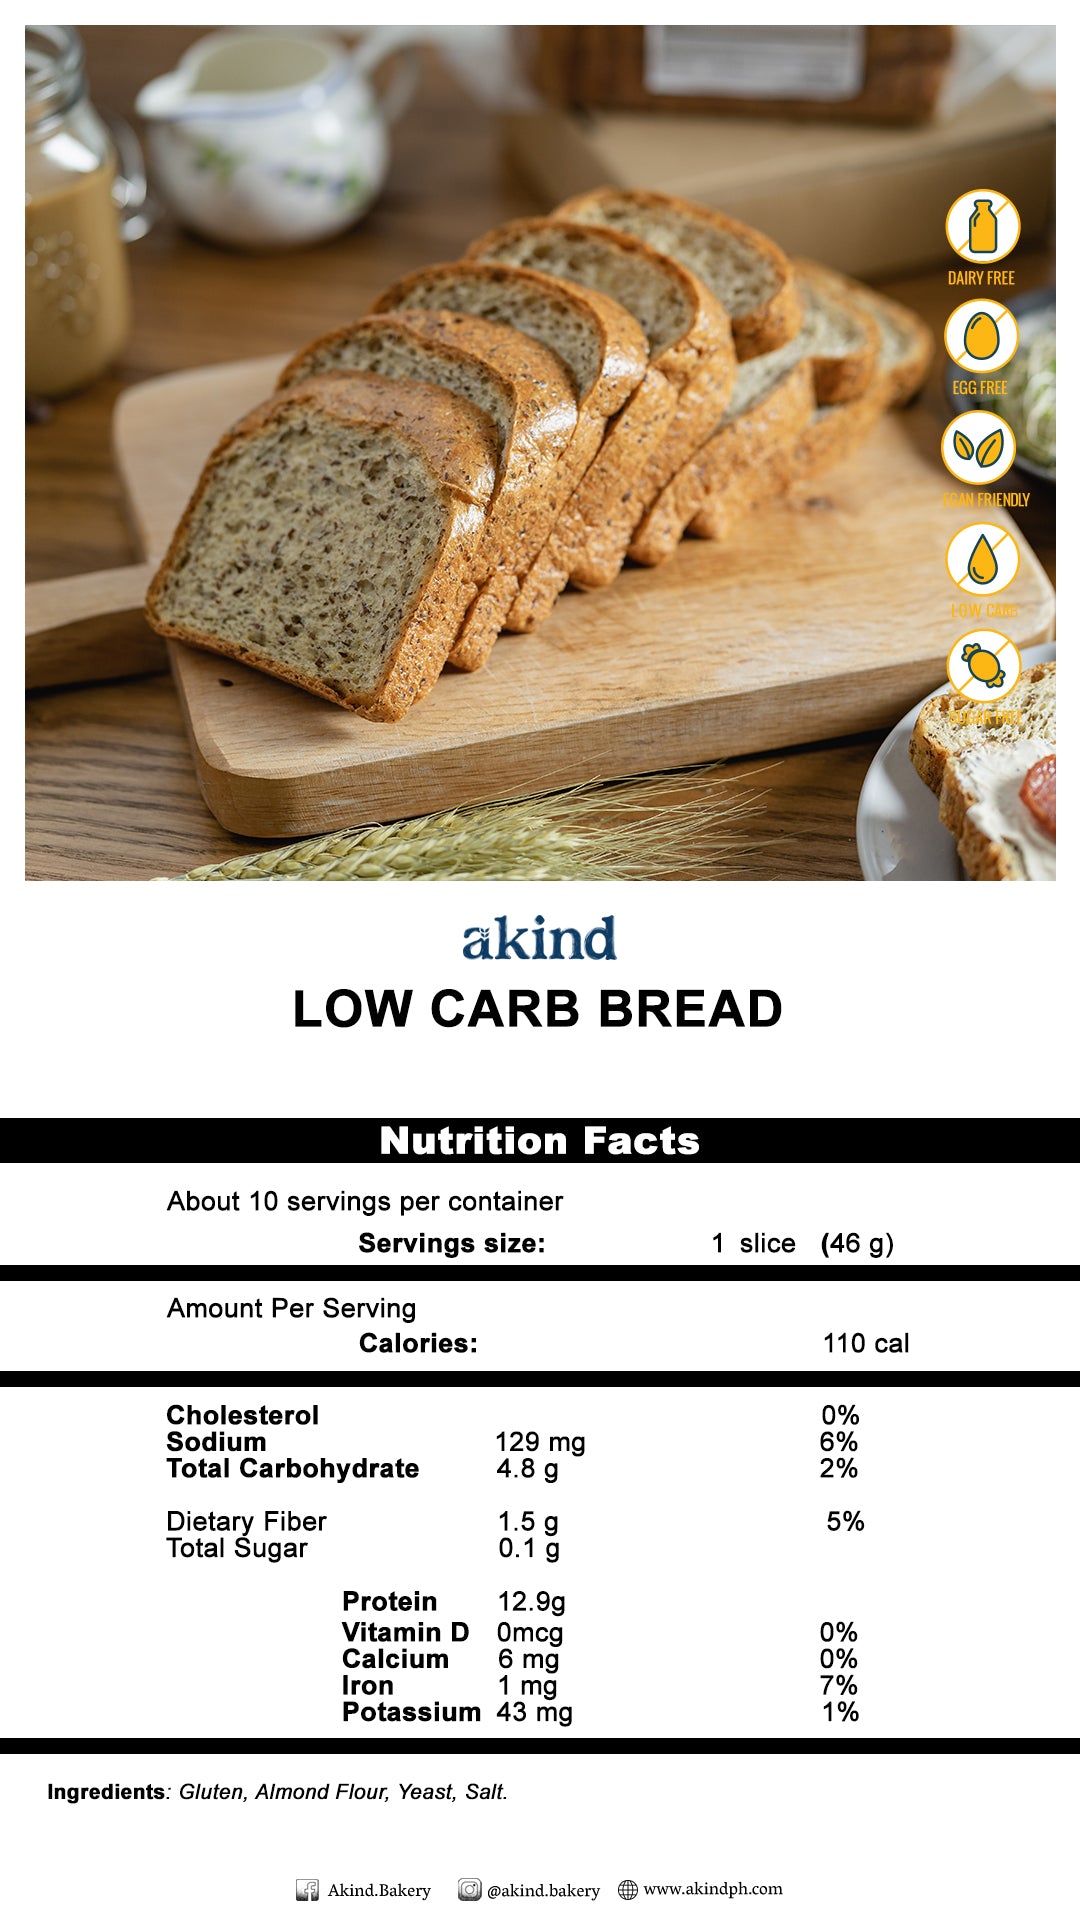 Akind Low Carb Bread